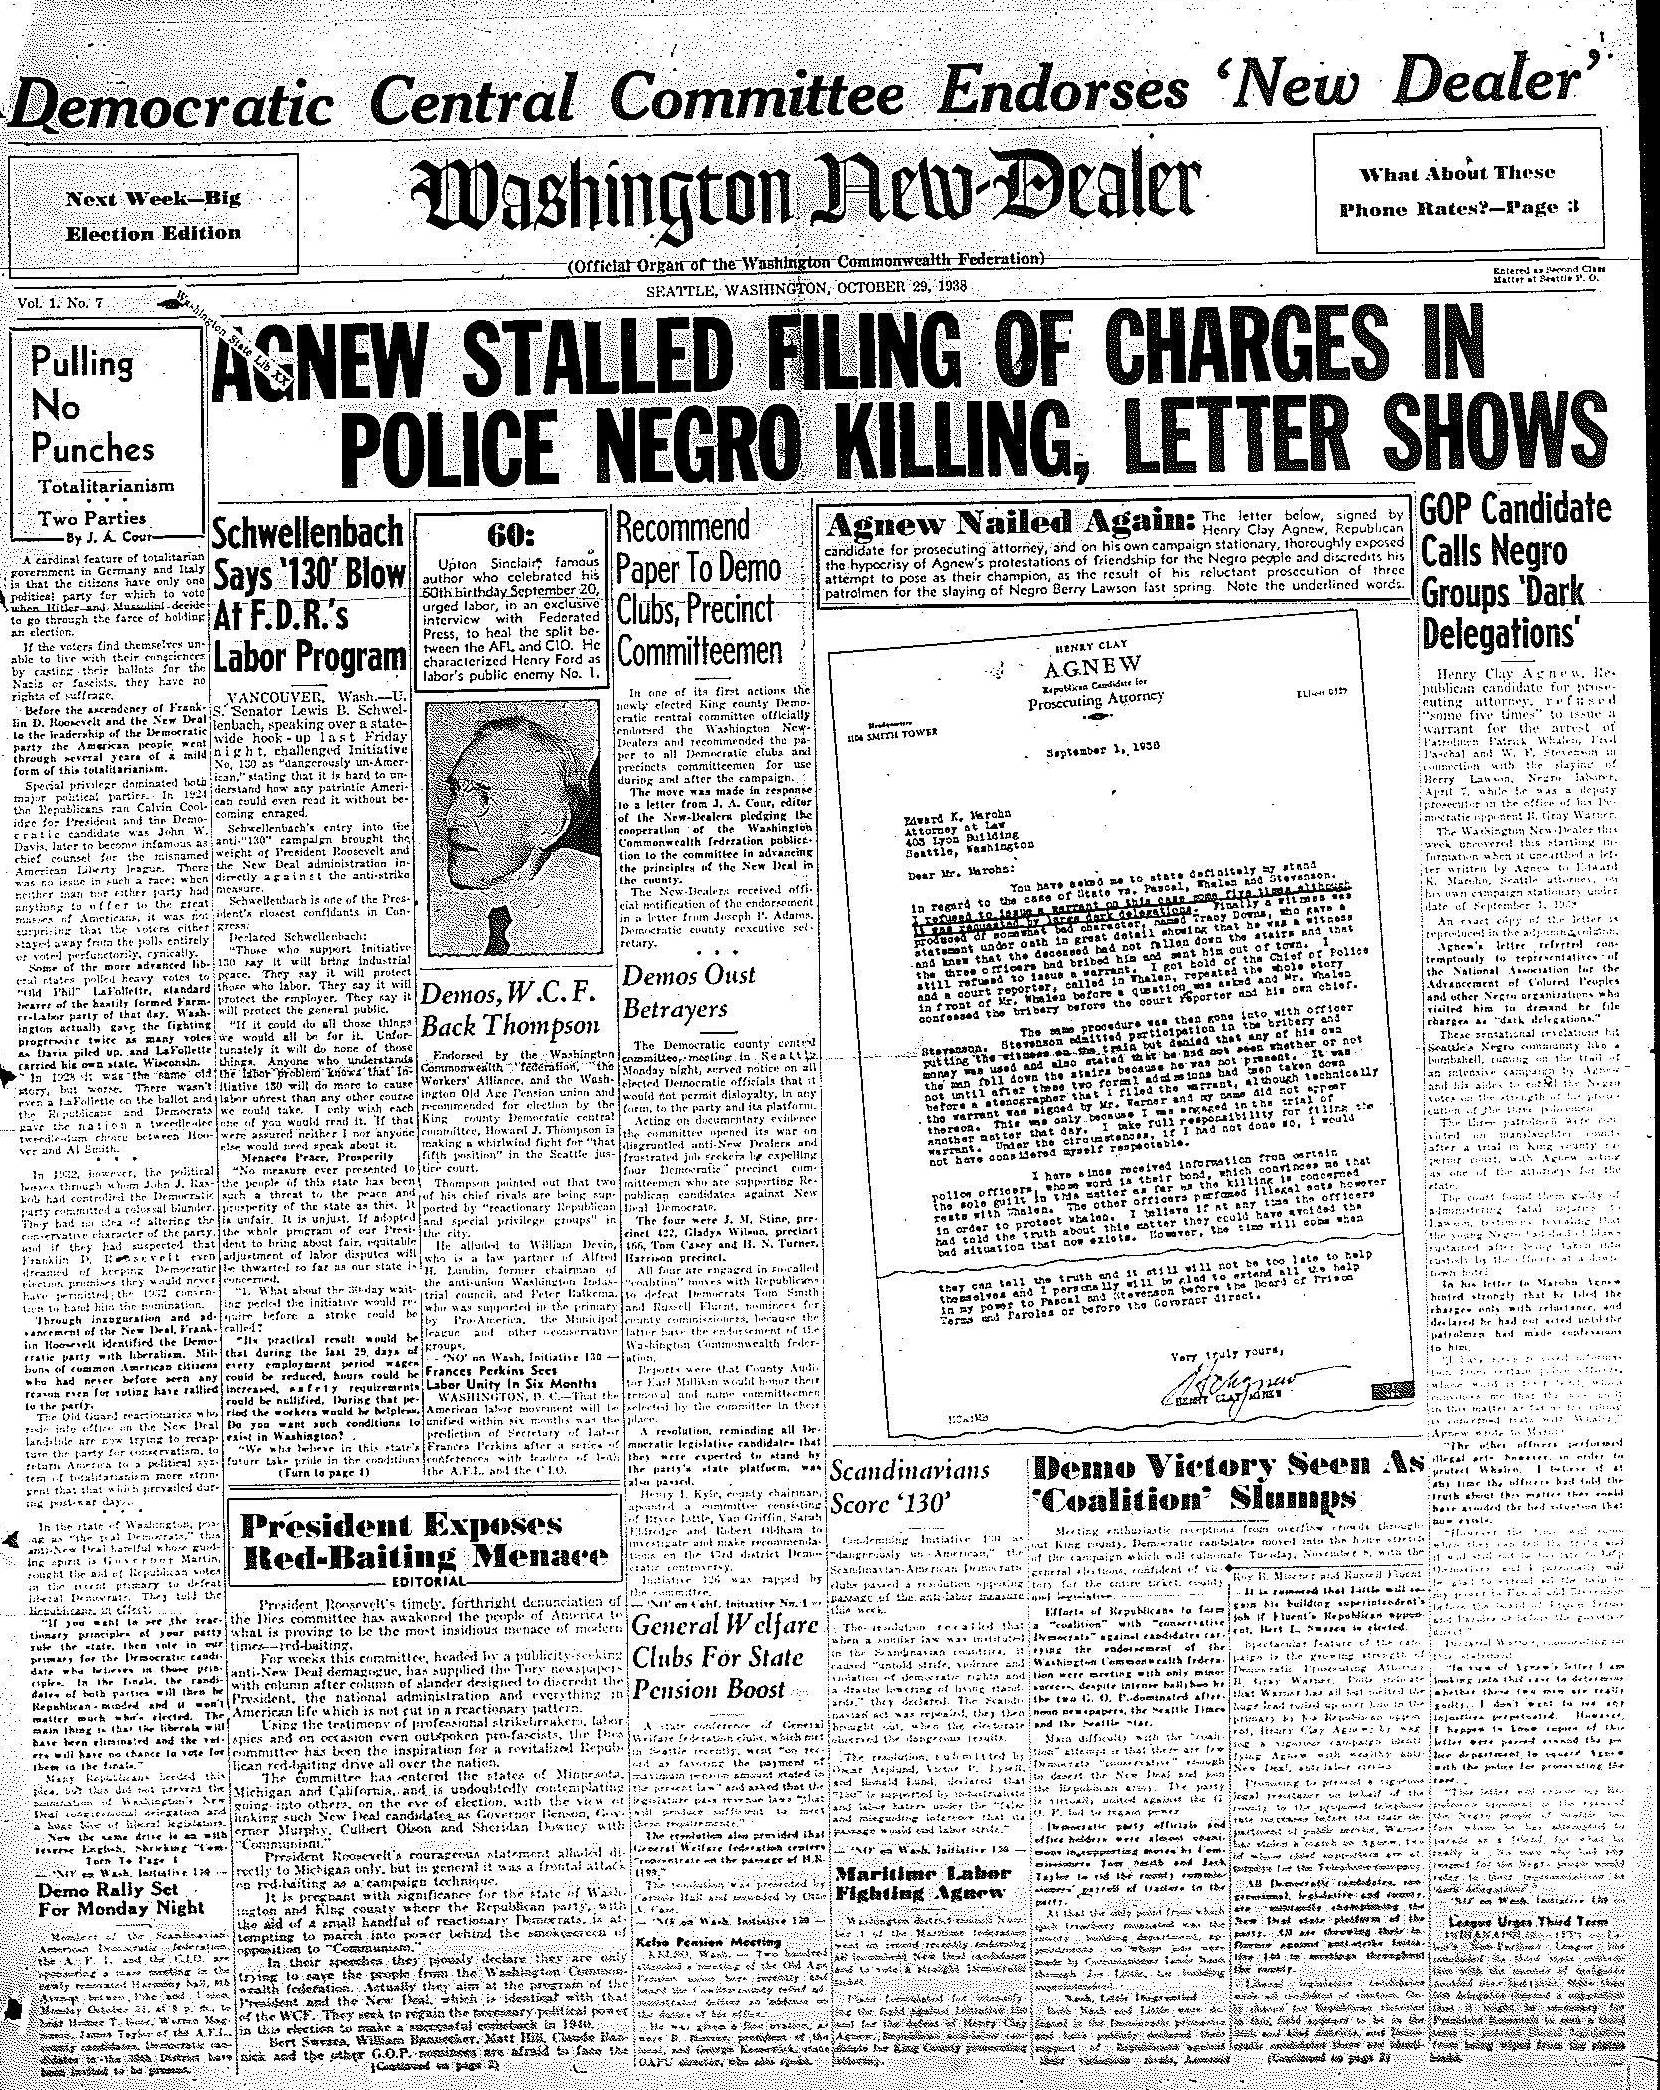 COMPLETE PAPER ROOSEVELT SAYS Cleveland WW2 Newspaper U.S WILL USE POISON GAS 